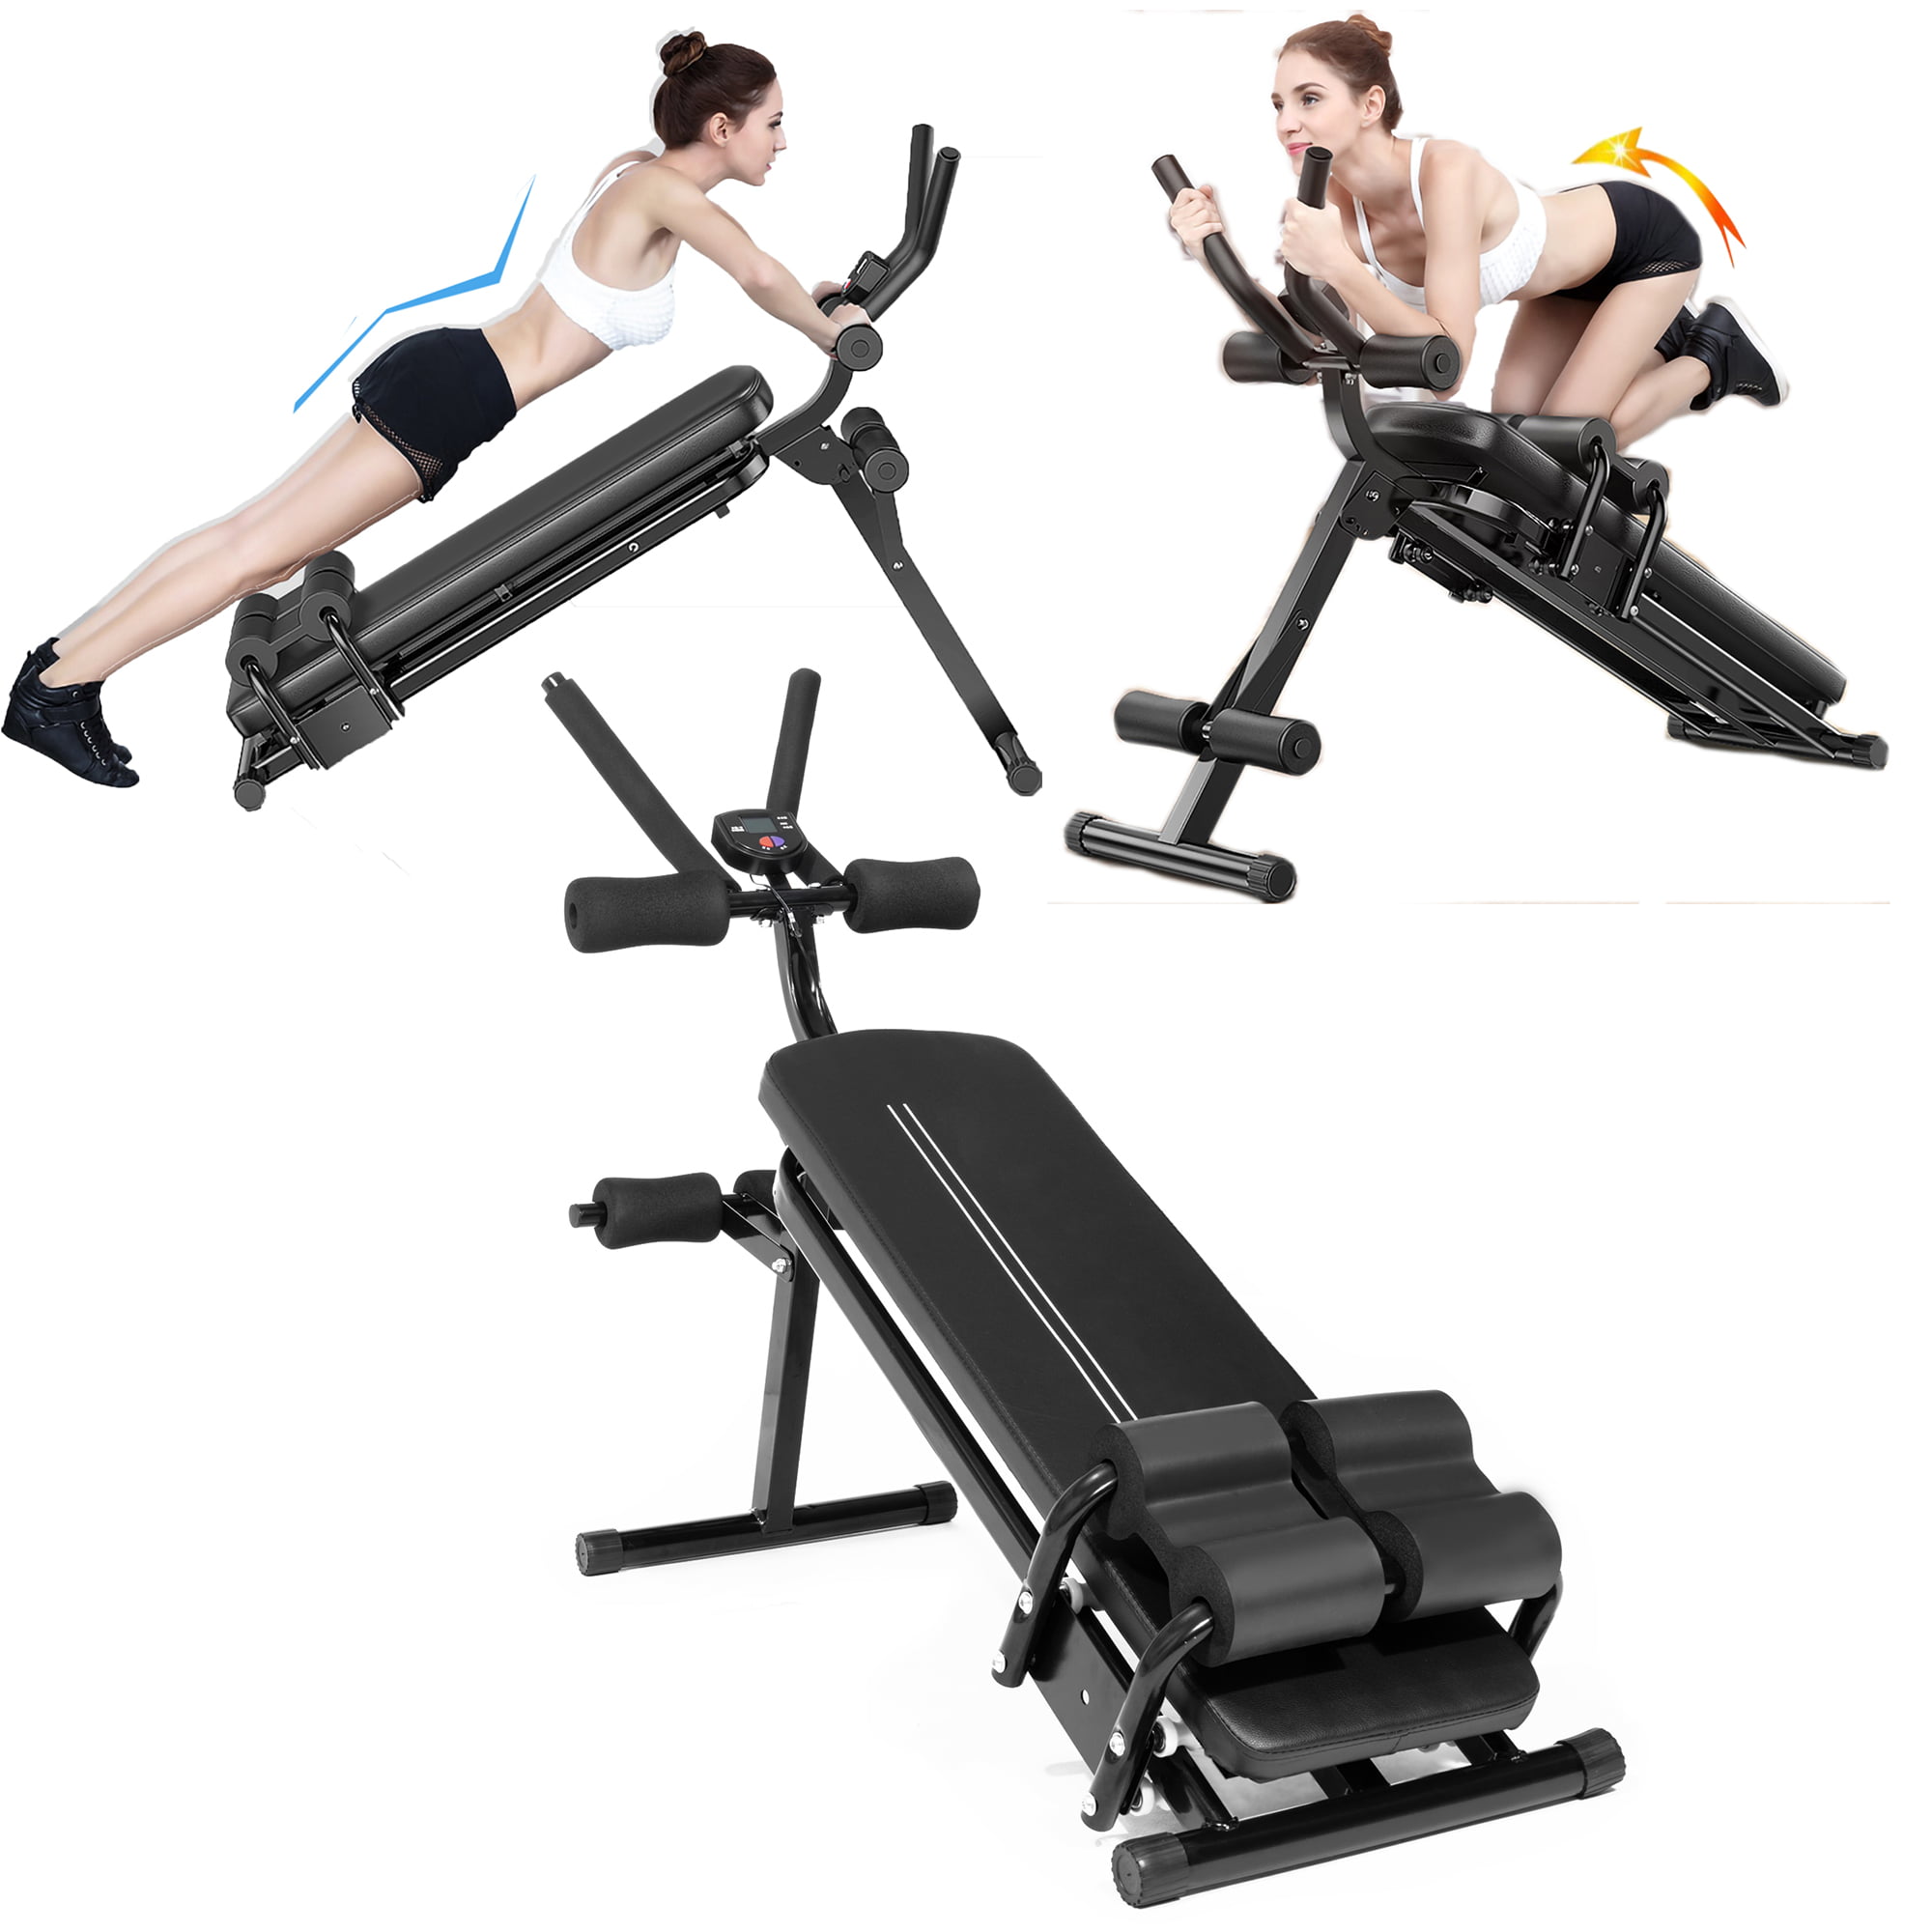 Adjustable Folding Incline Sit Up Chest Leg Abs Fly Bench Flat Weight Press Gym